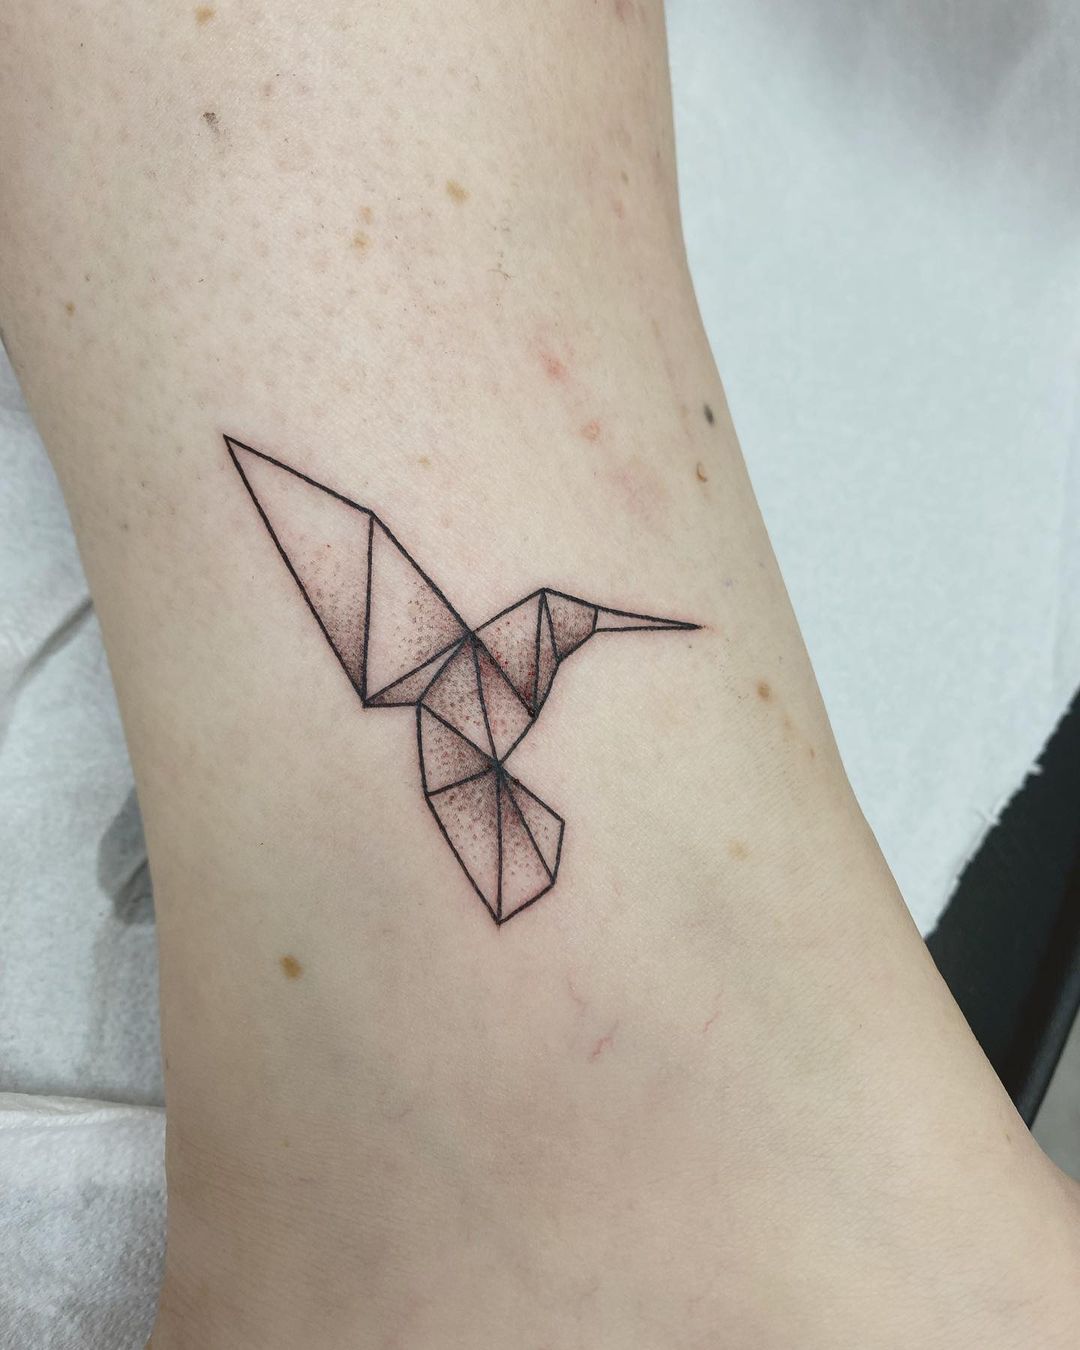 Black and White Origami Hummingbird Tattoo on Ankle